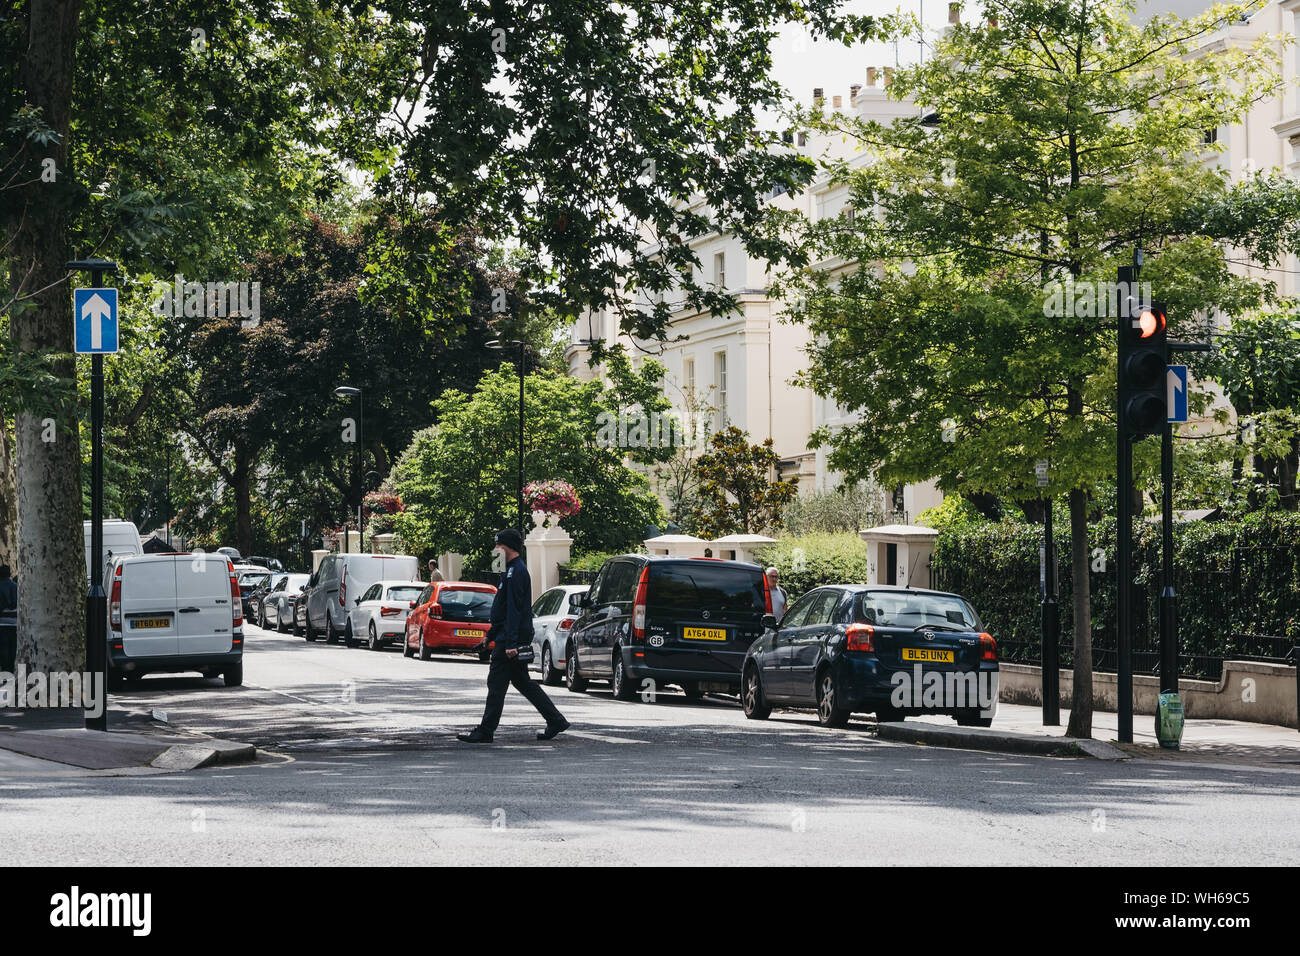 London, UK - July 18, 2019: Parking warden crossing the road in Marylebone, a chic residential area of London famous for Baker Street and Madame Tussa Stock Photo